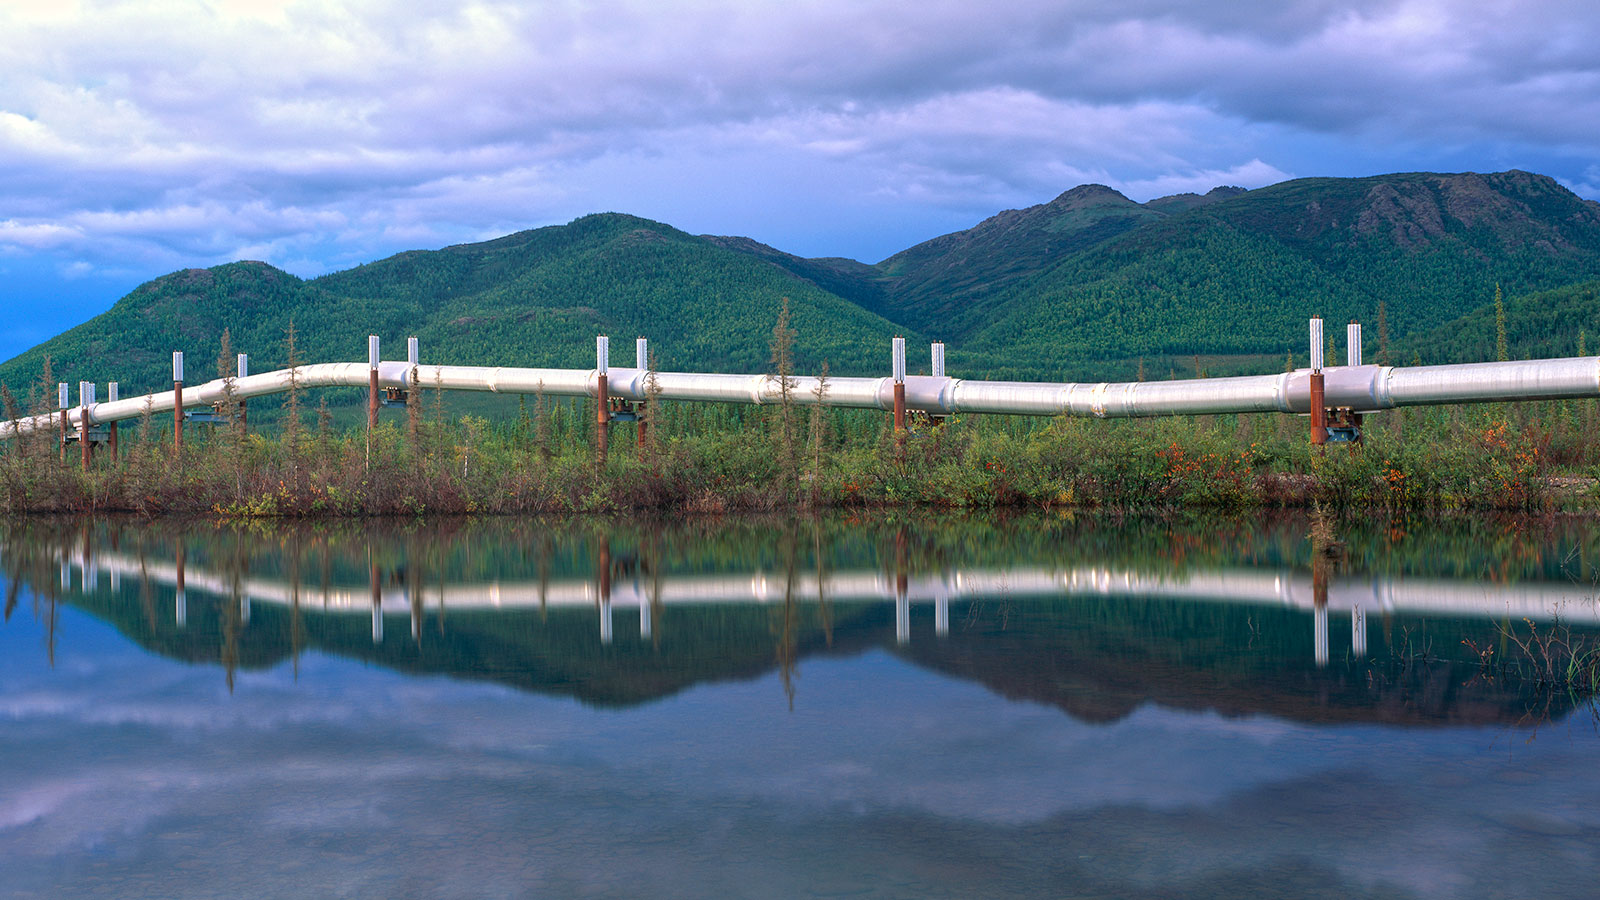 Trans-Alaska pipeline reflected in a pond